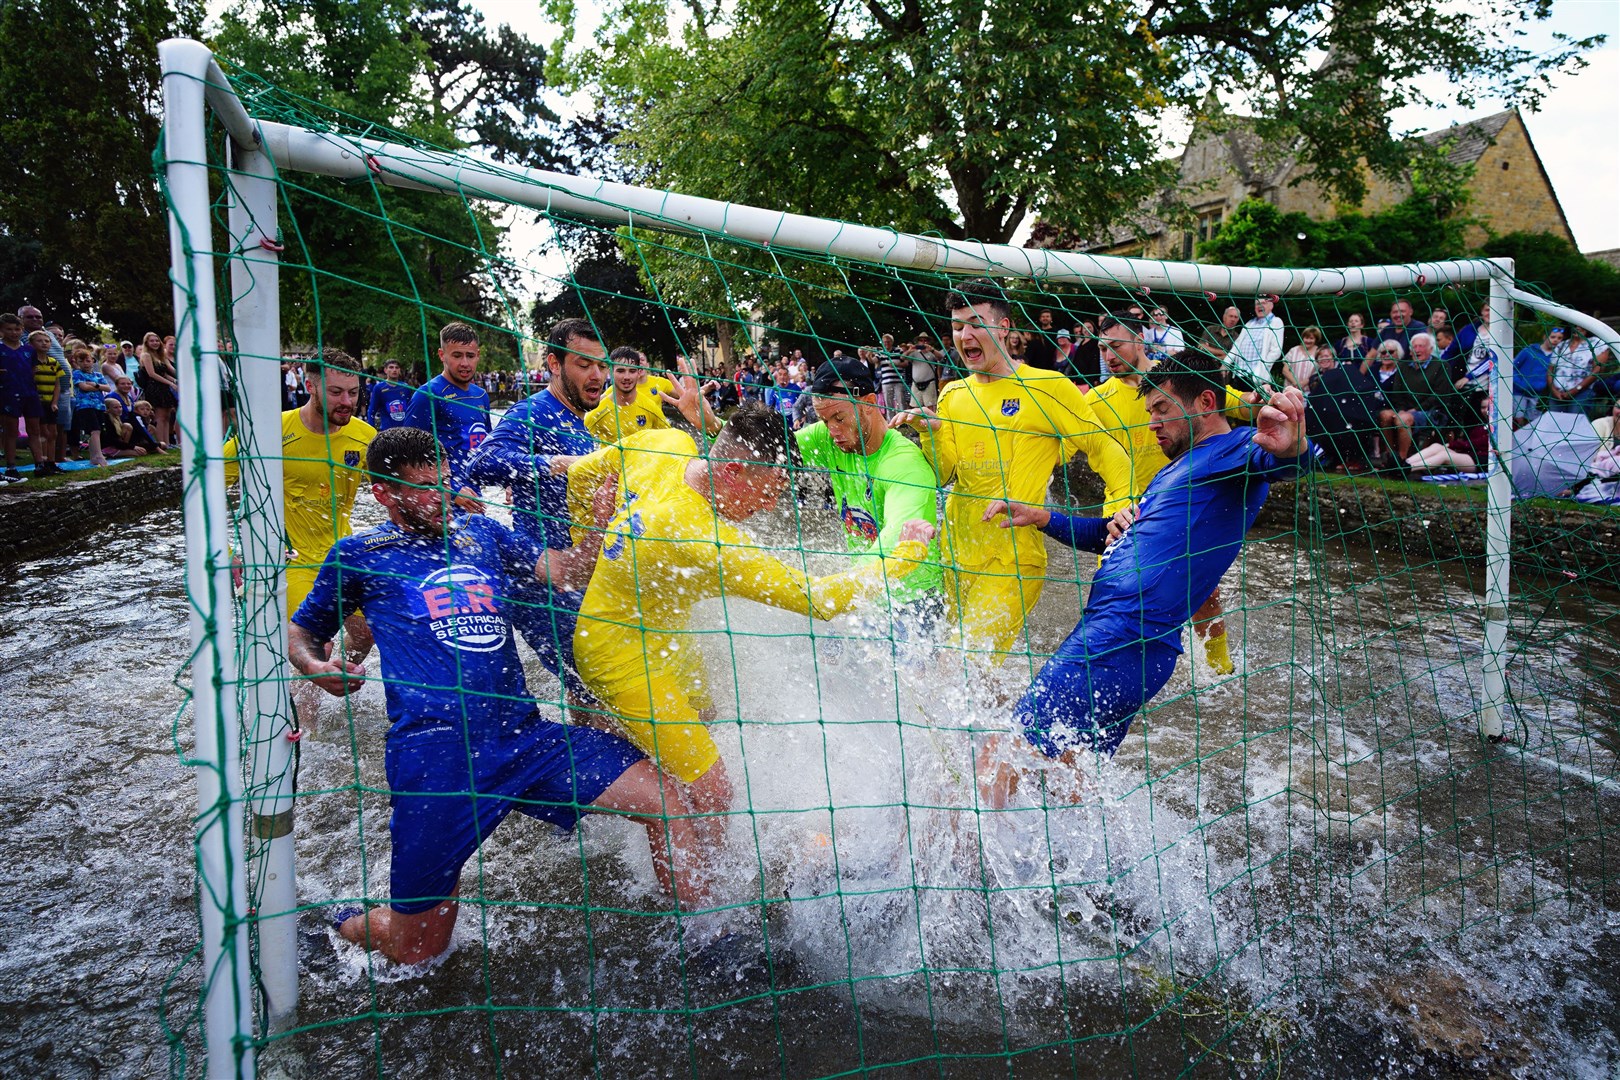 Footballers from Bourton Rovers create a splash as they fight for the ball during the annual River Windrush football match, which has been taking place for more than 100 years in the Cotswolds village of Bourton-on-the-Water, Gloucestershire (Ben Birchall/PA)